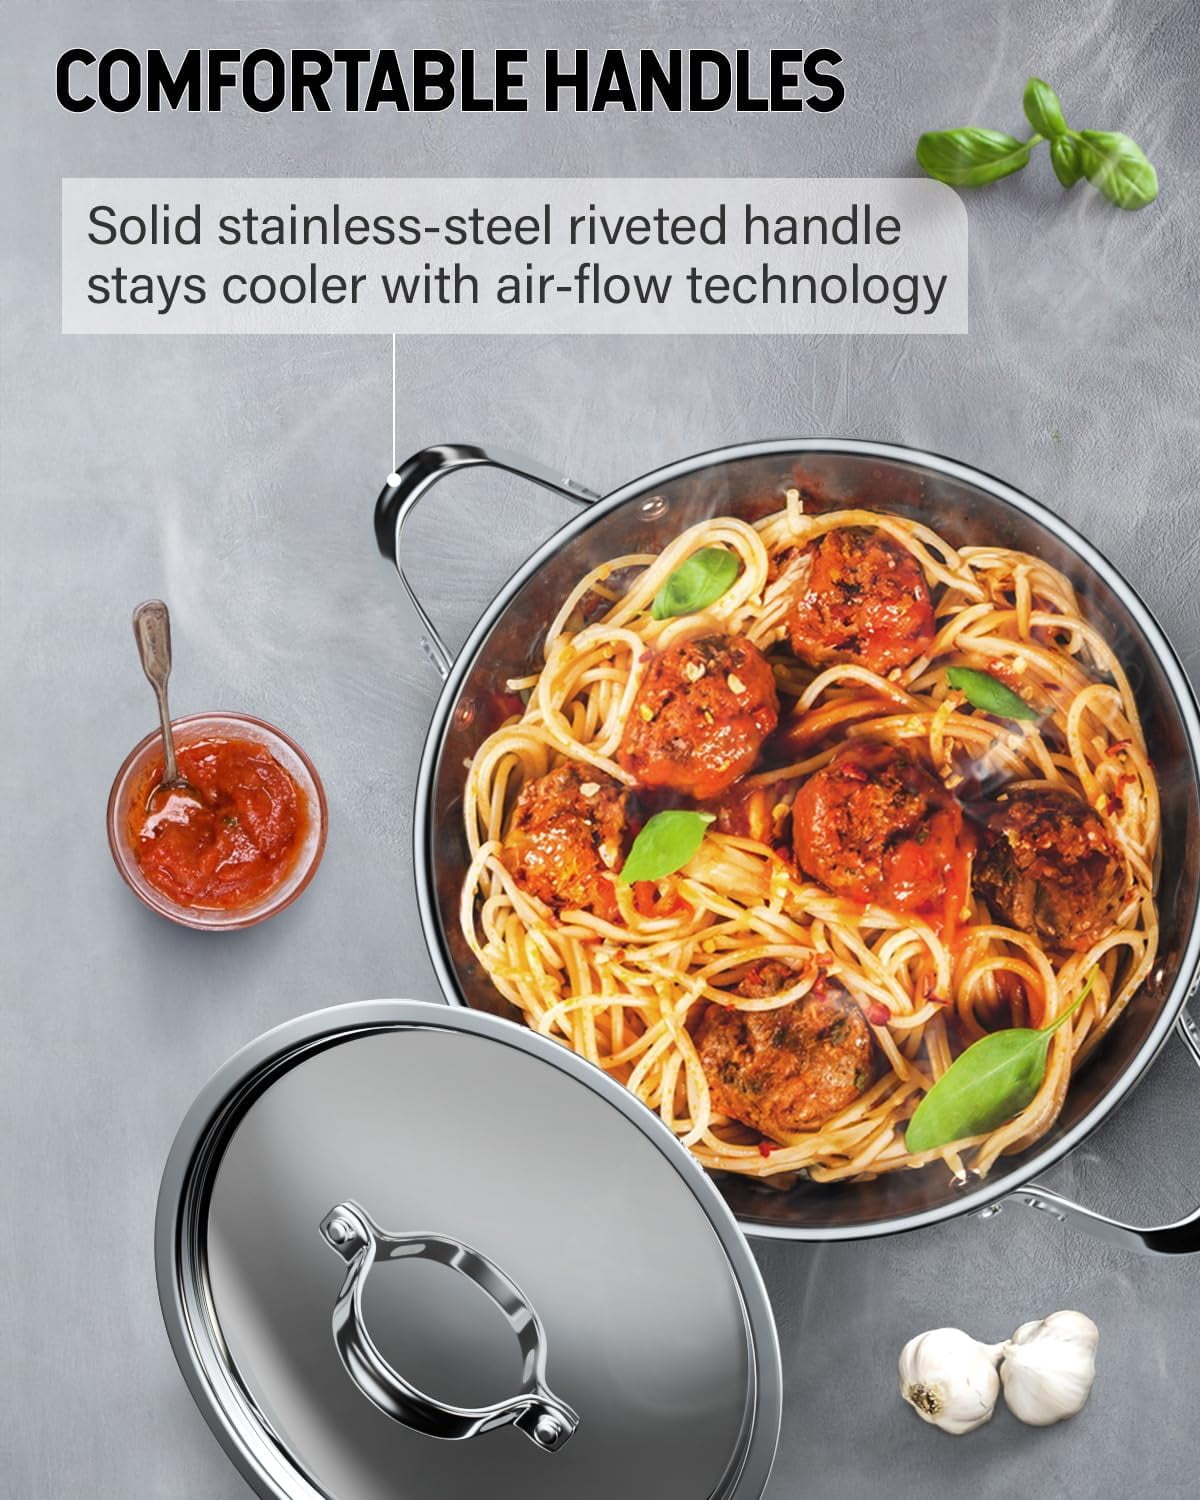 LIANYU 12QT 18/10 Stainless Steel Stock Pot with Lid, Large Soup Pot, Big  Cookware, 12 Quart Canning Pasta Pot with Measuring Mark, Tall Cooking Pot